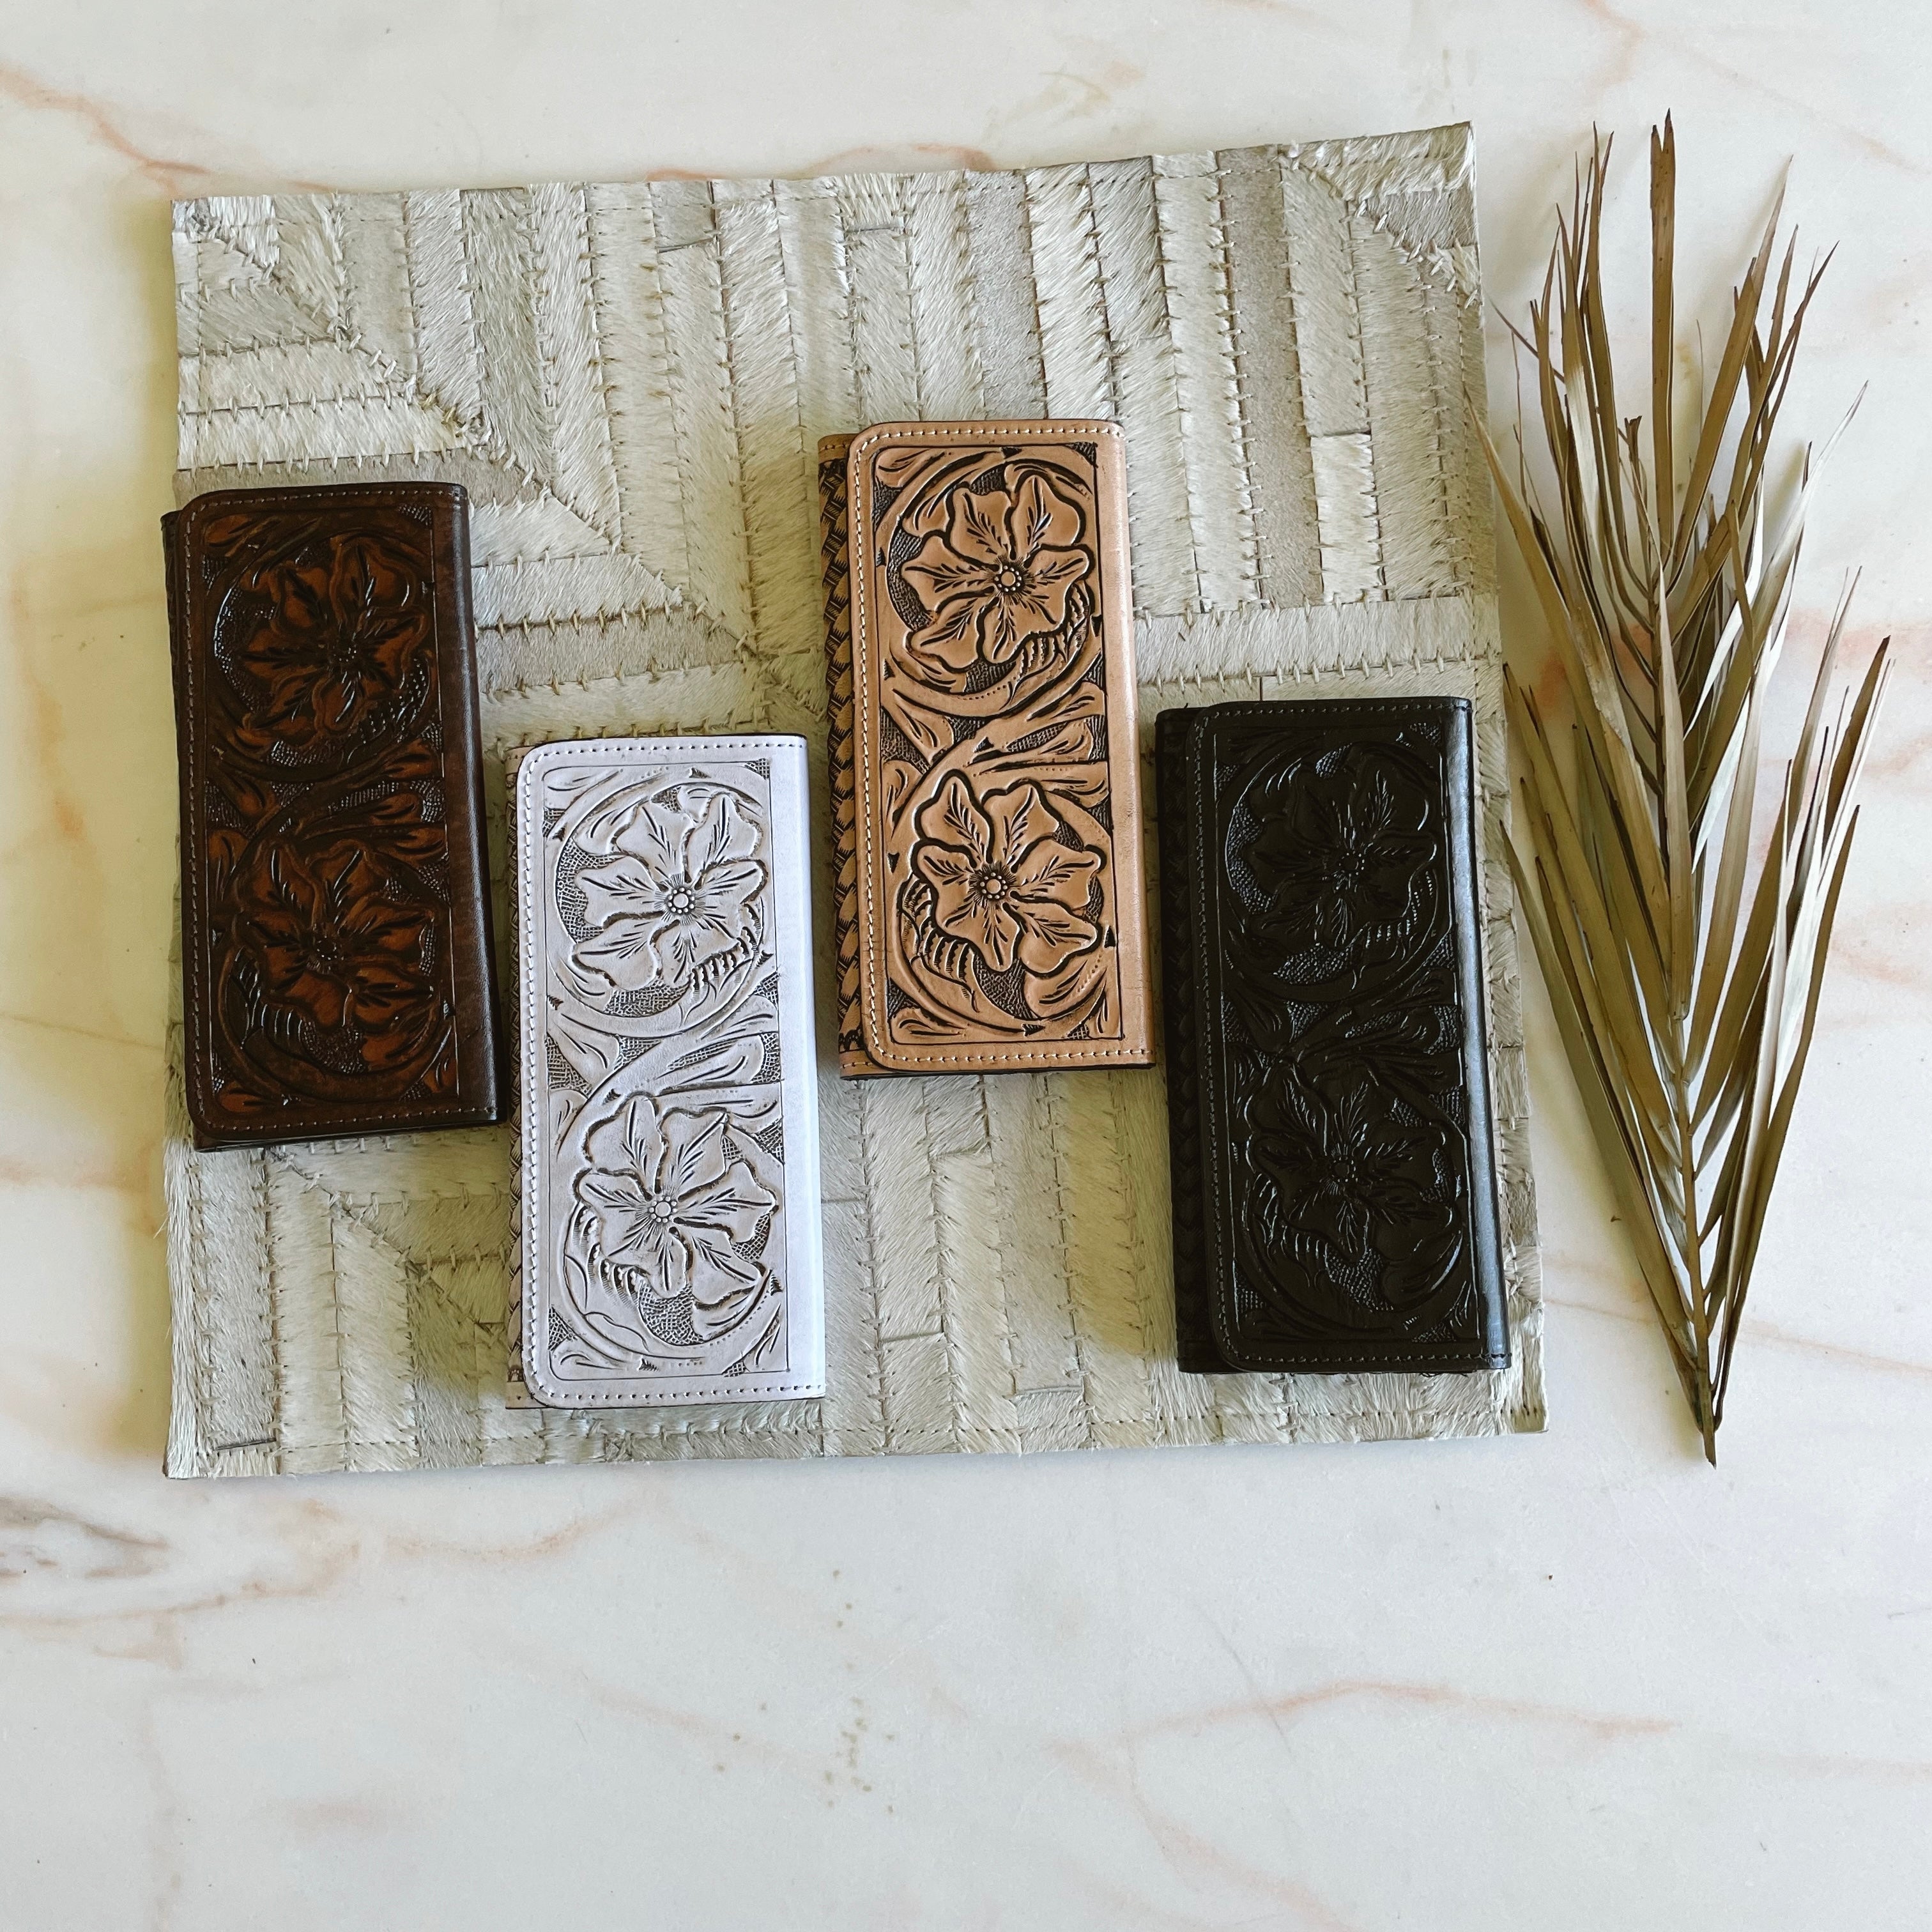 Rory [Tooled Wallet]